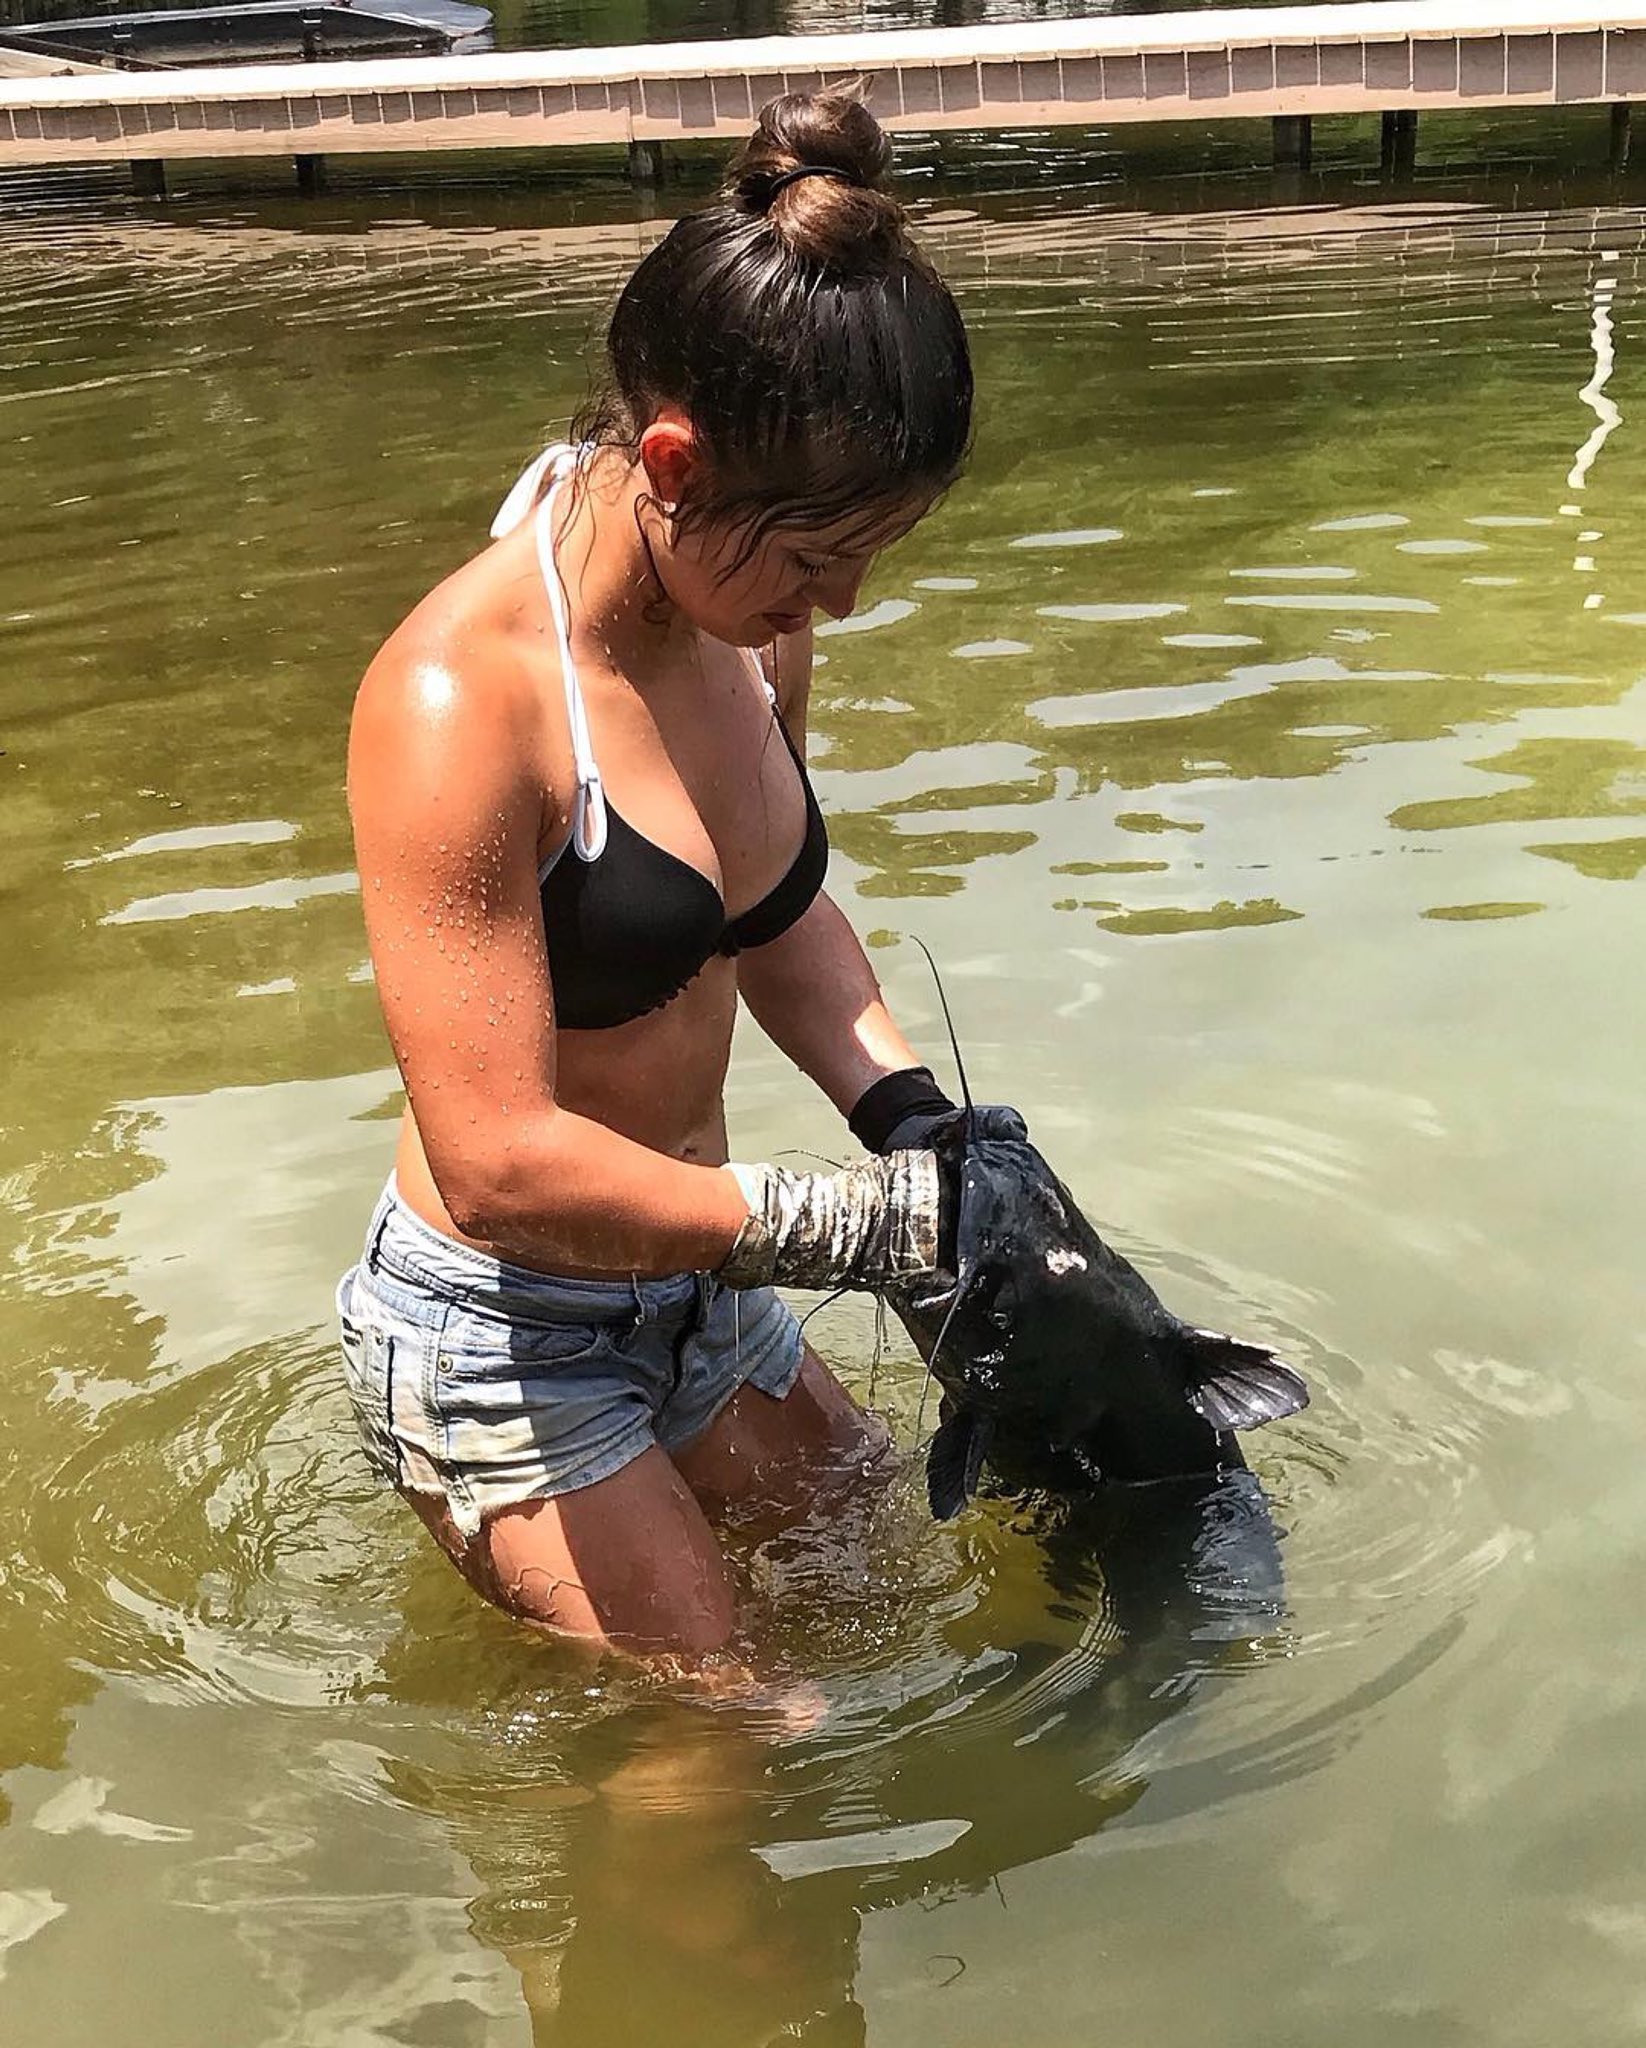 Backwoods Life® on X: Can't wait to see what Hannah Barron pulls out of  the water in Alabama this summer! Do it girl! #backwoodslife #hannahbarron  #alabama #catfish #grabbing #noodling #fishing #river #badass #